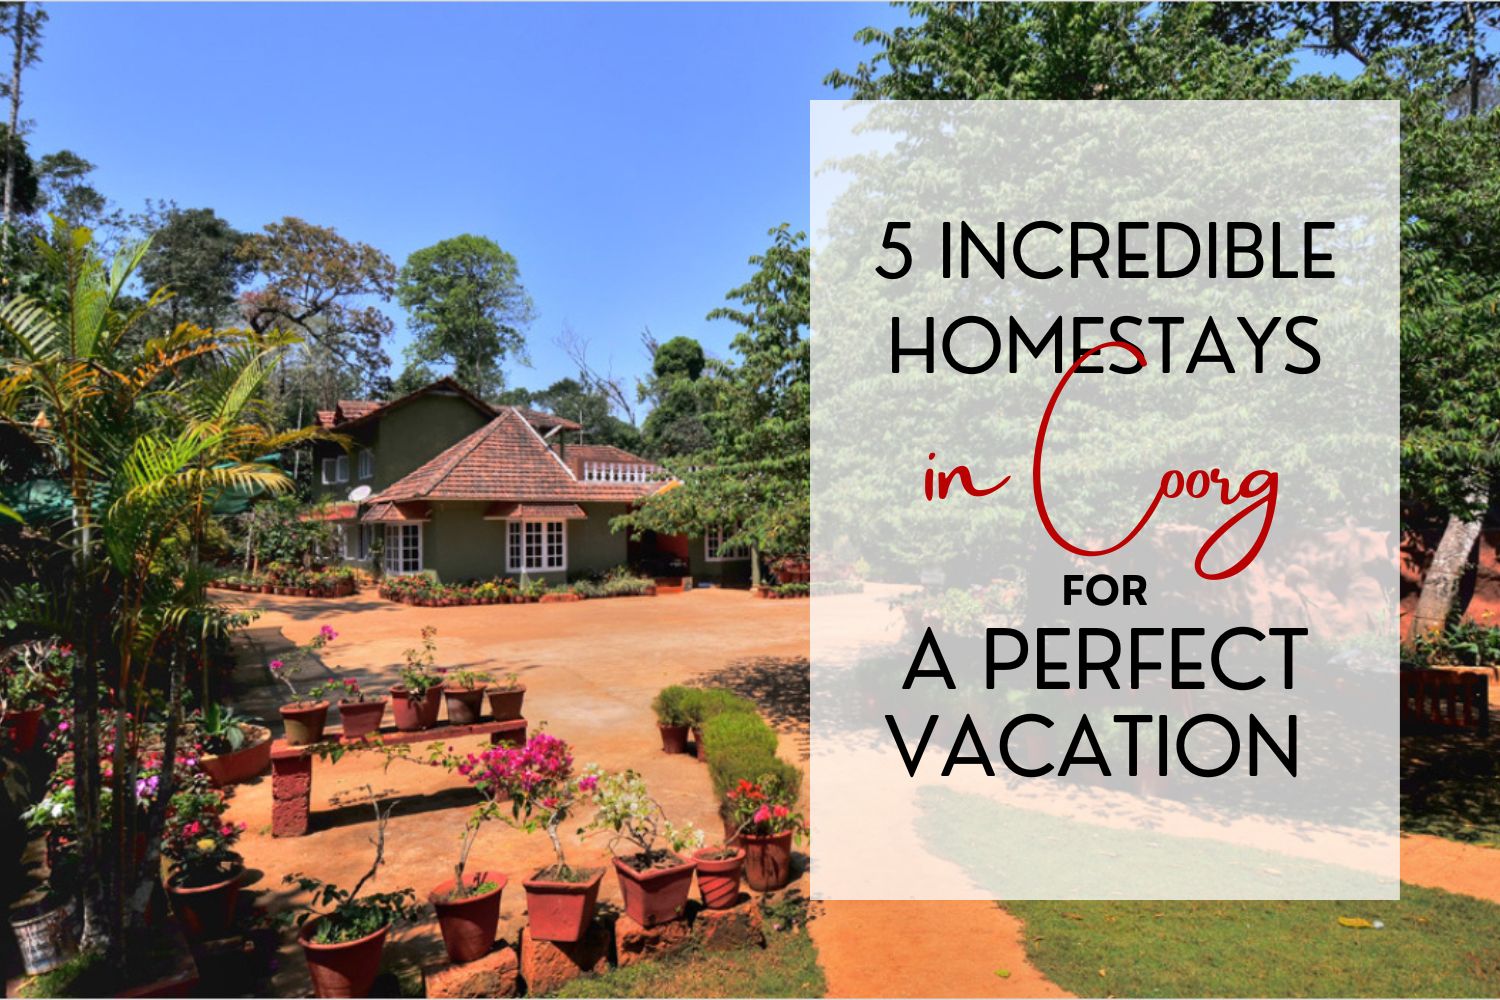 5 Incredible Homestays in Coorg for a Perfect Vacation